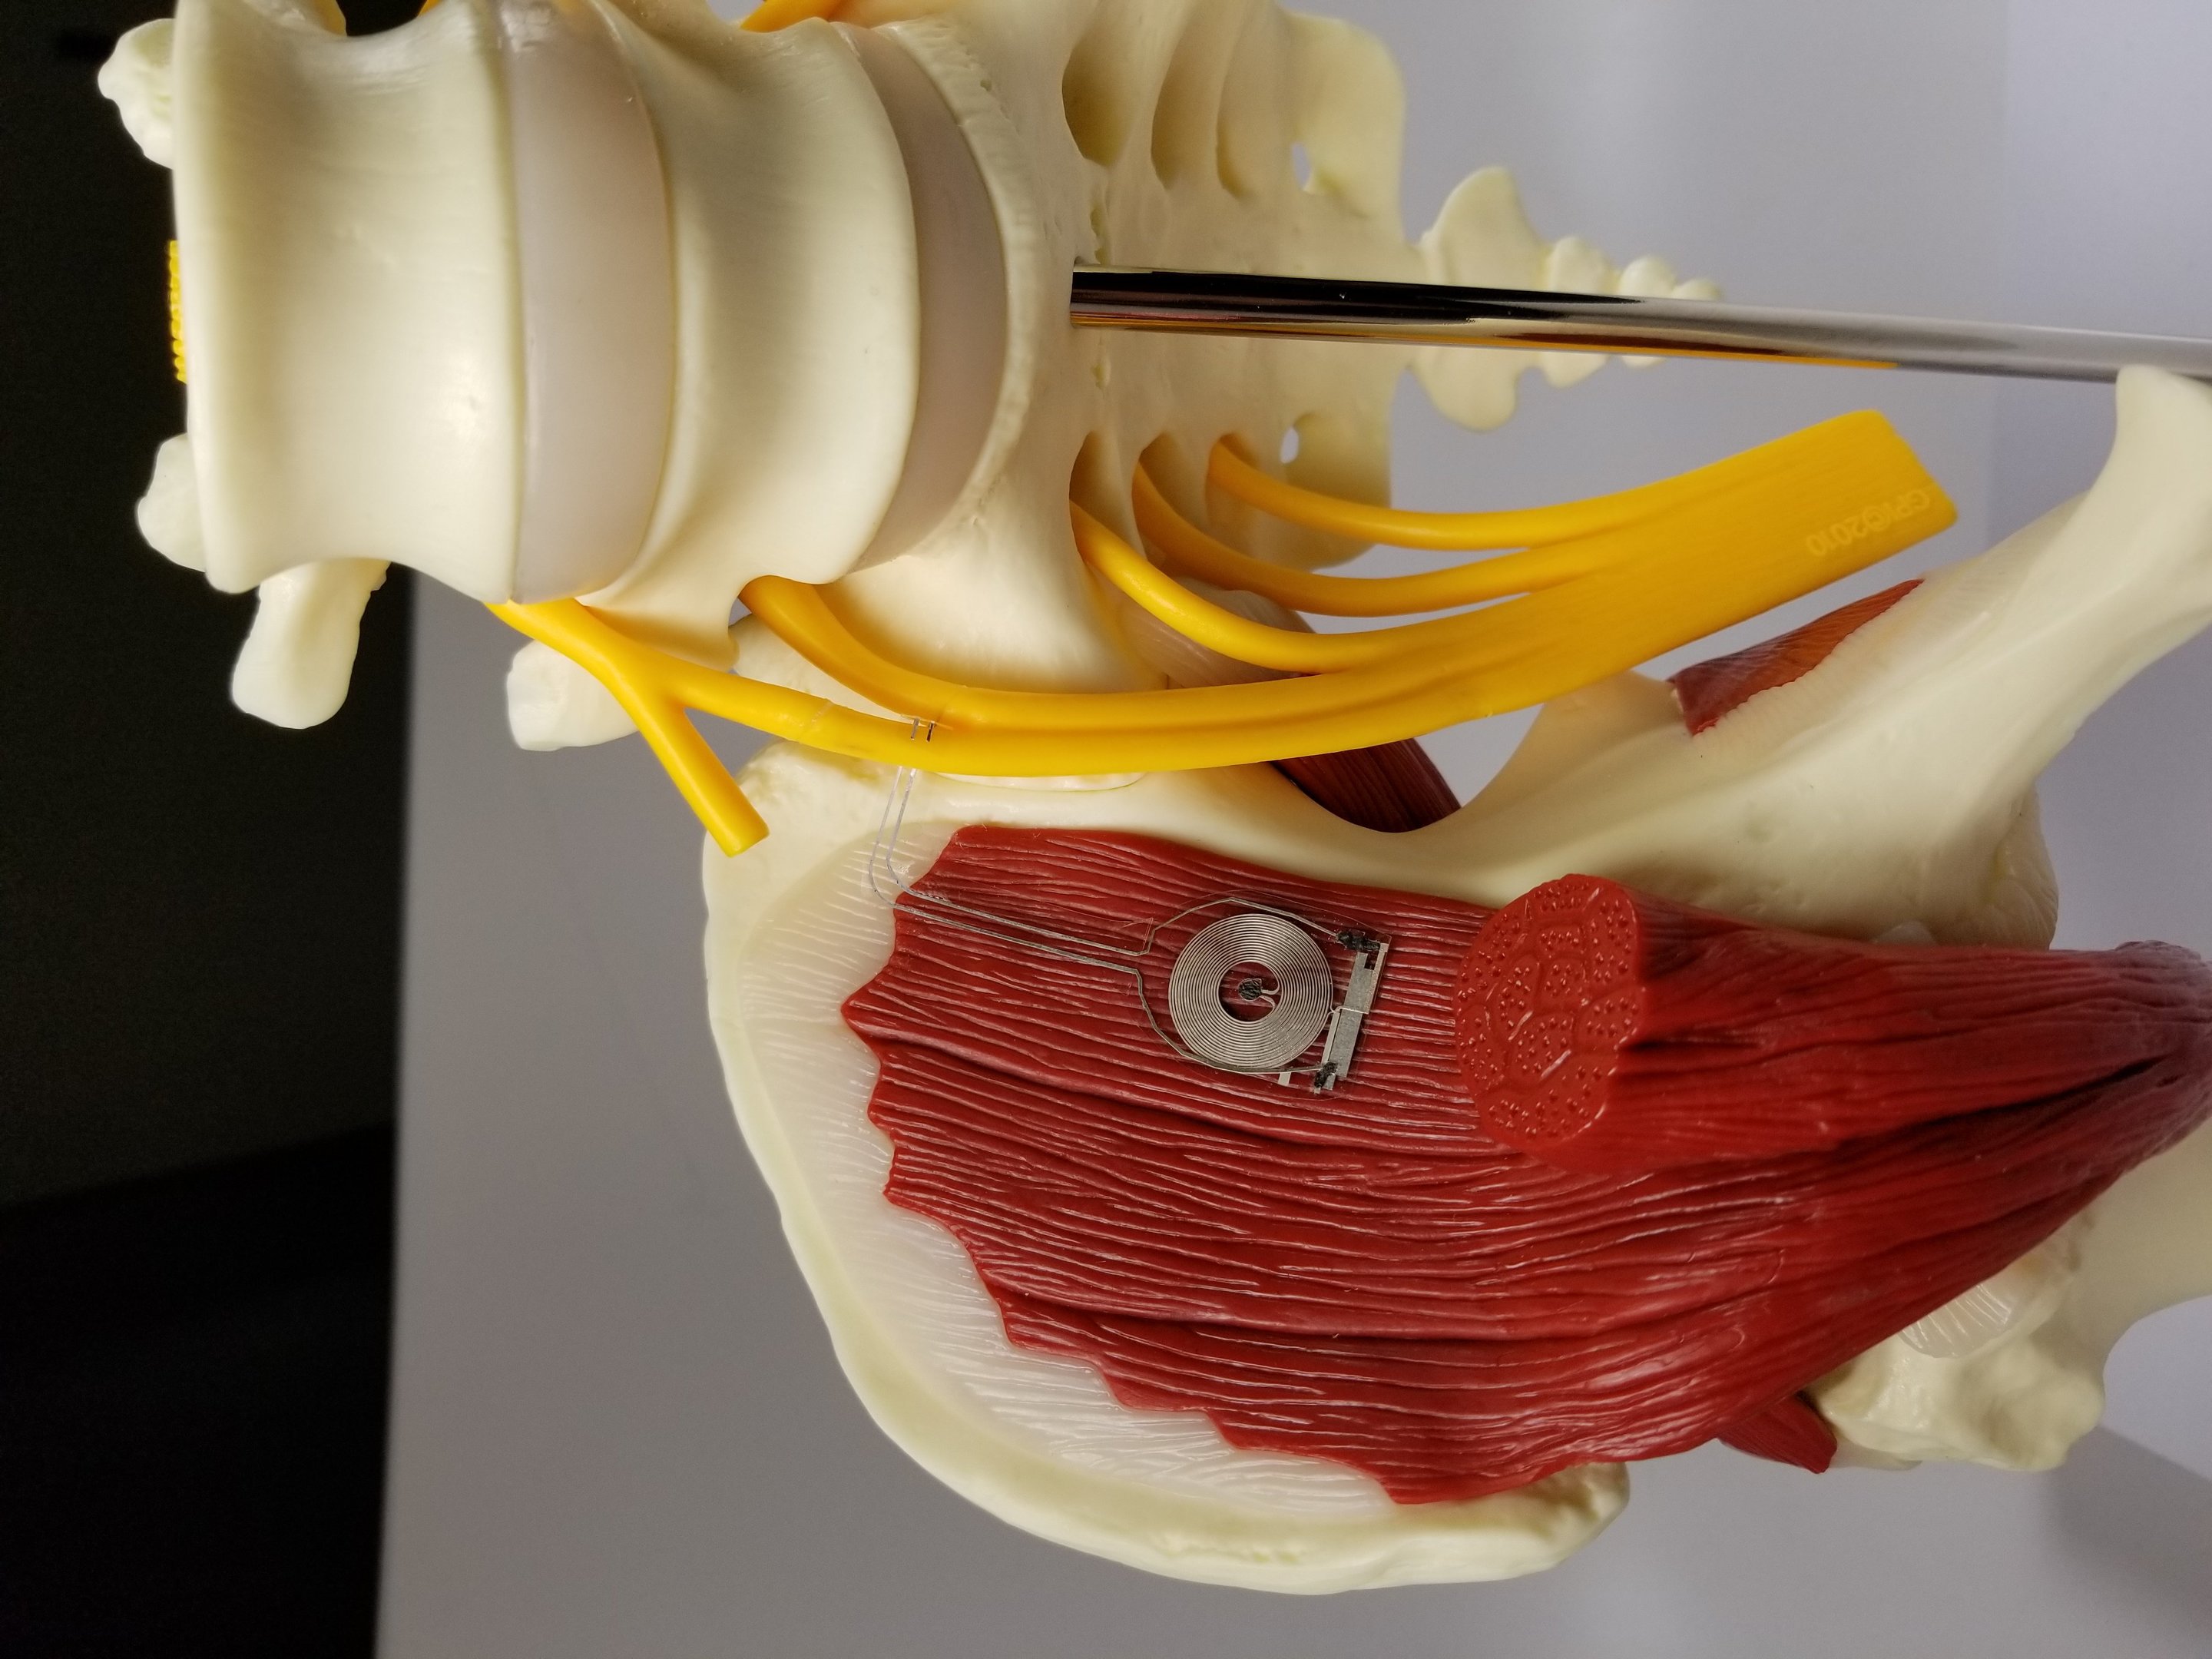 Newly invented electrical stimulation (ES) device improves nerve  regeneration in humans